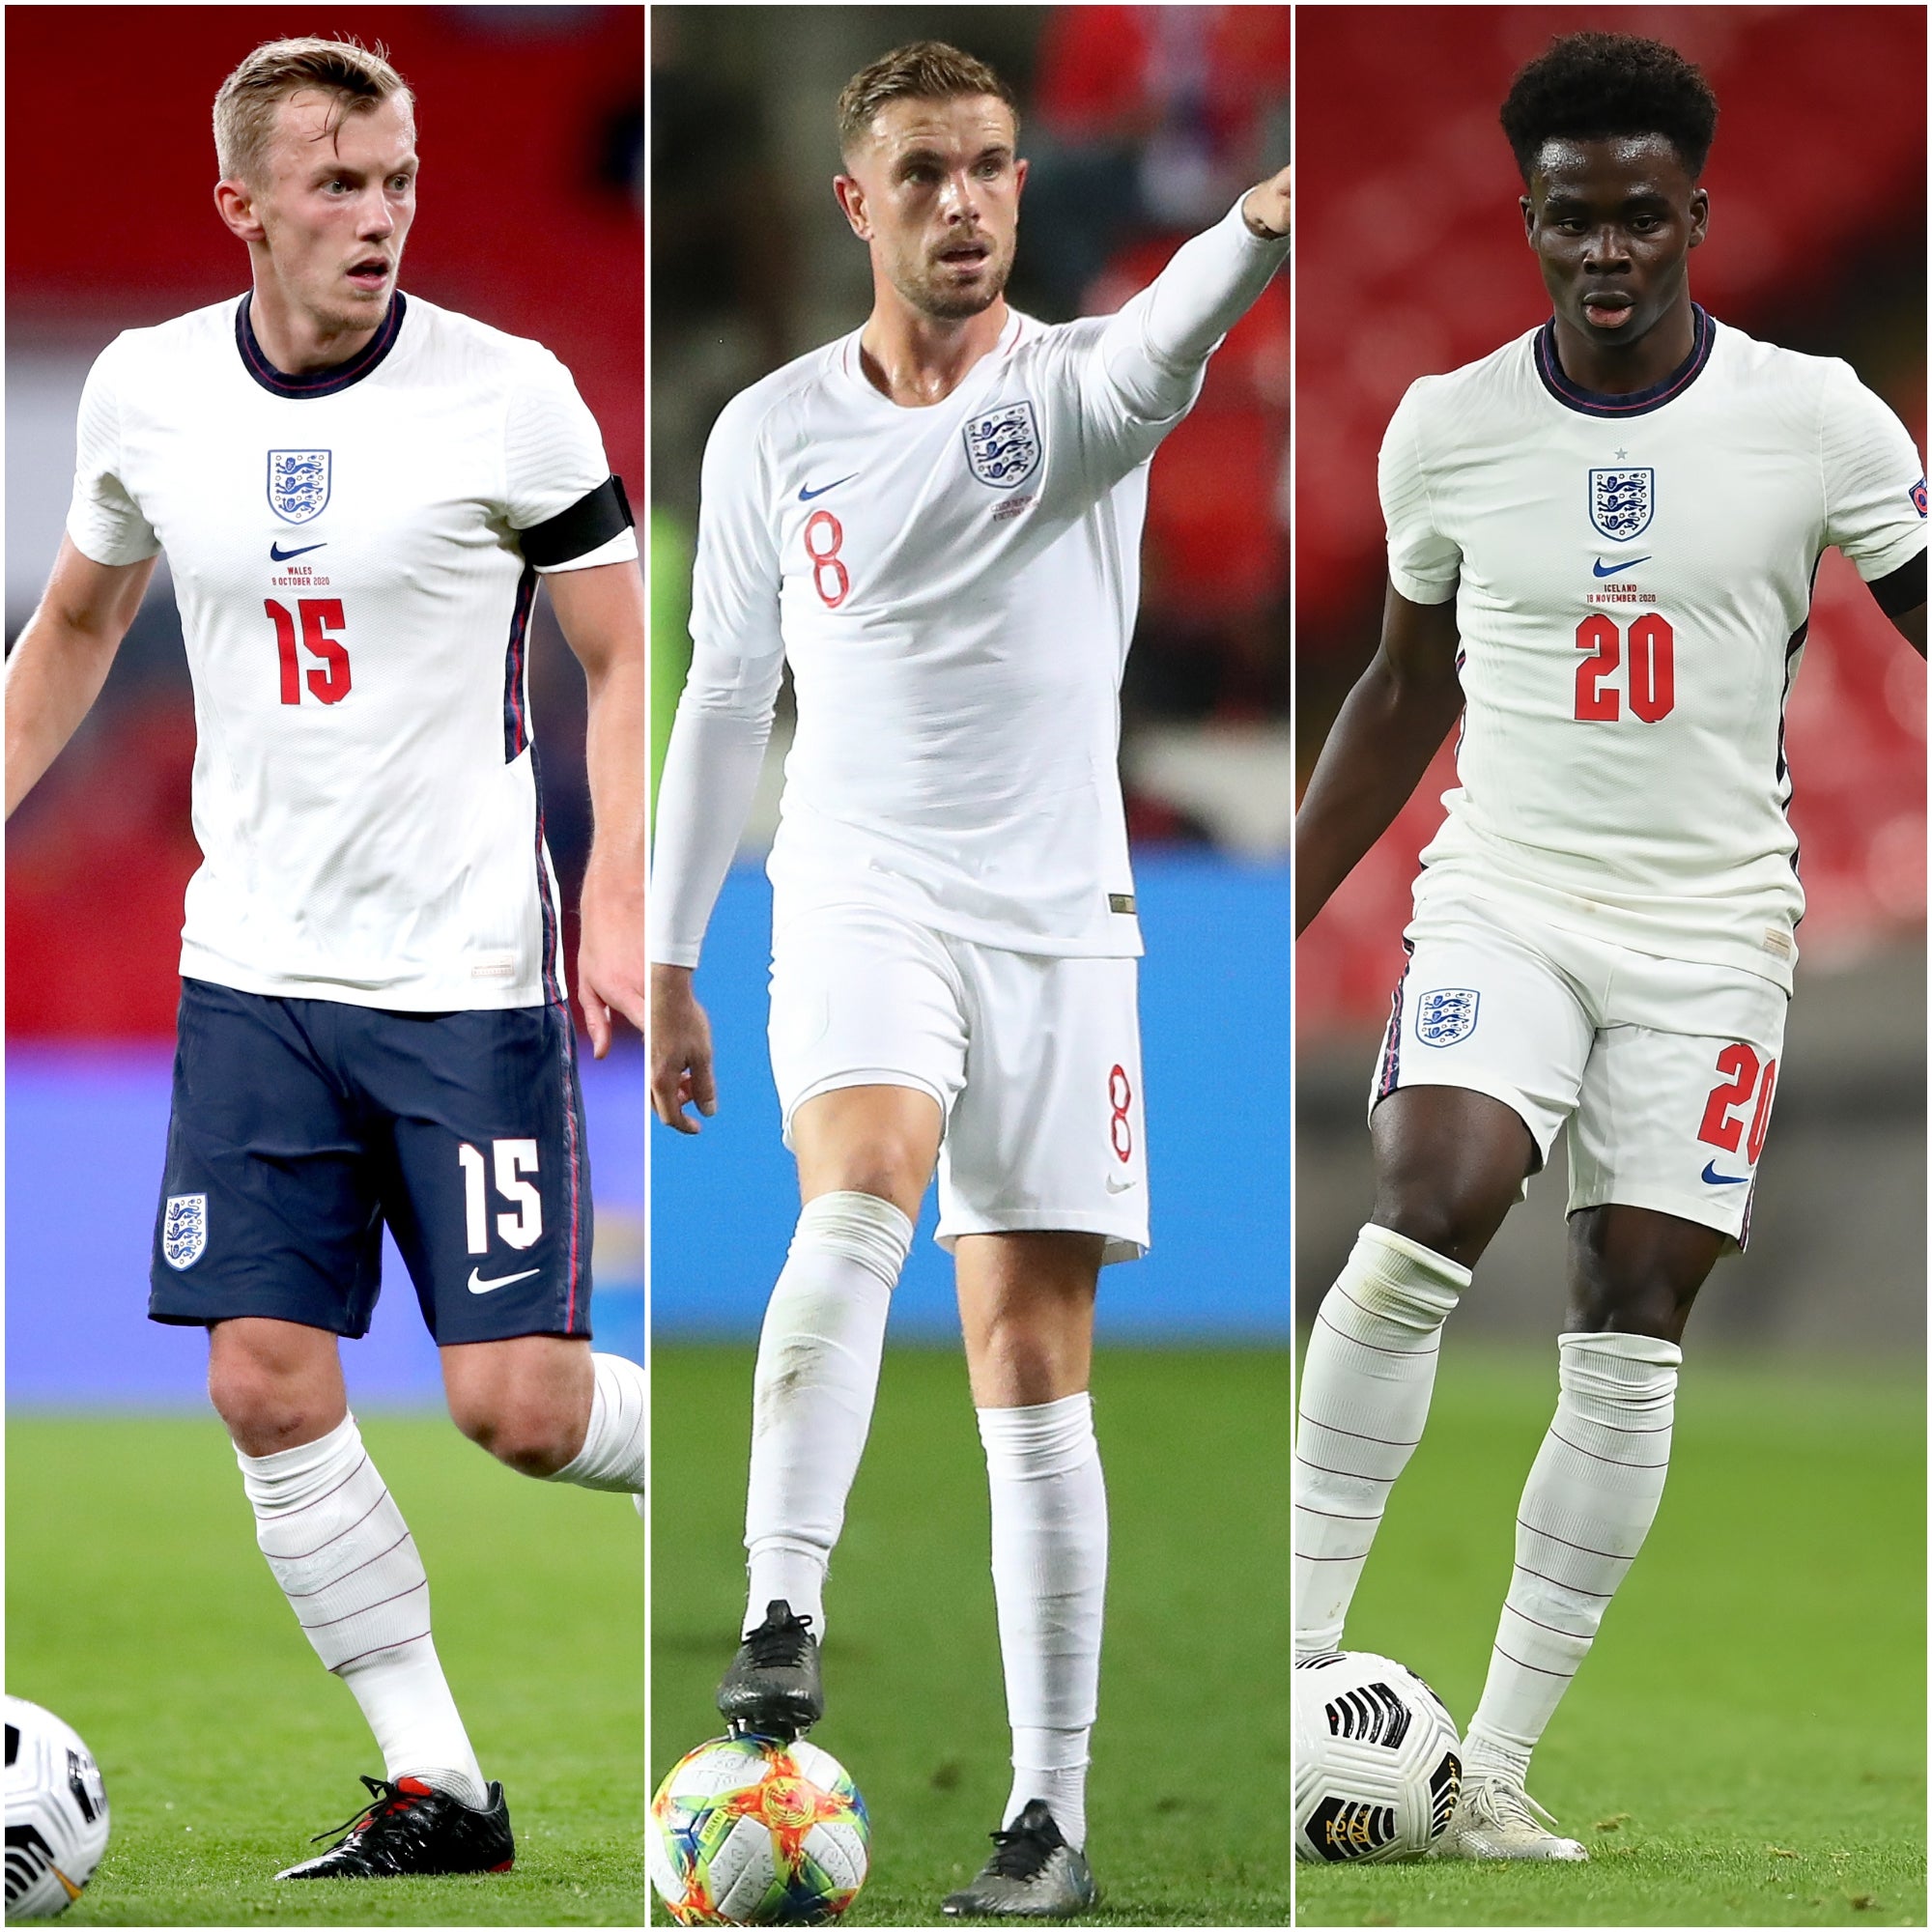 James Ward-Prowse, Jordan Henderson and Bukayo Saka will be hopin to play some part of England's friendly against Romania.